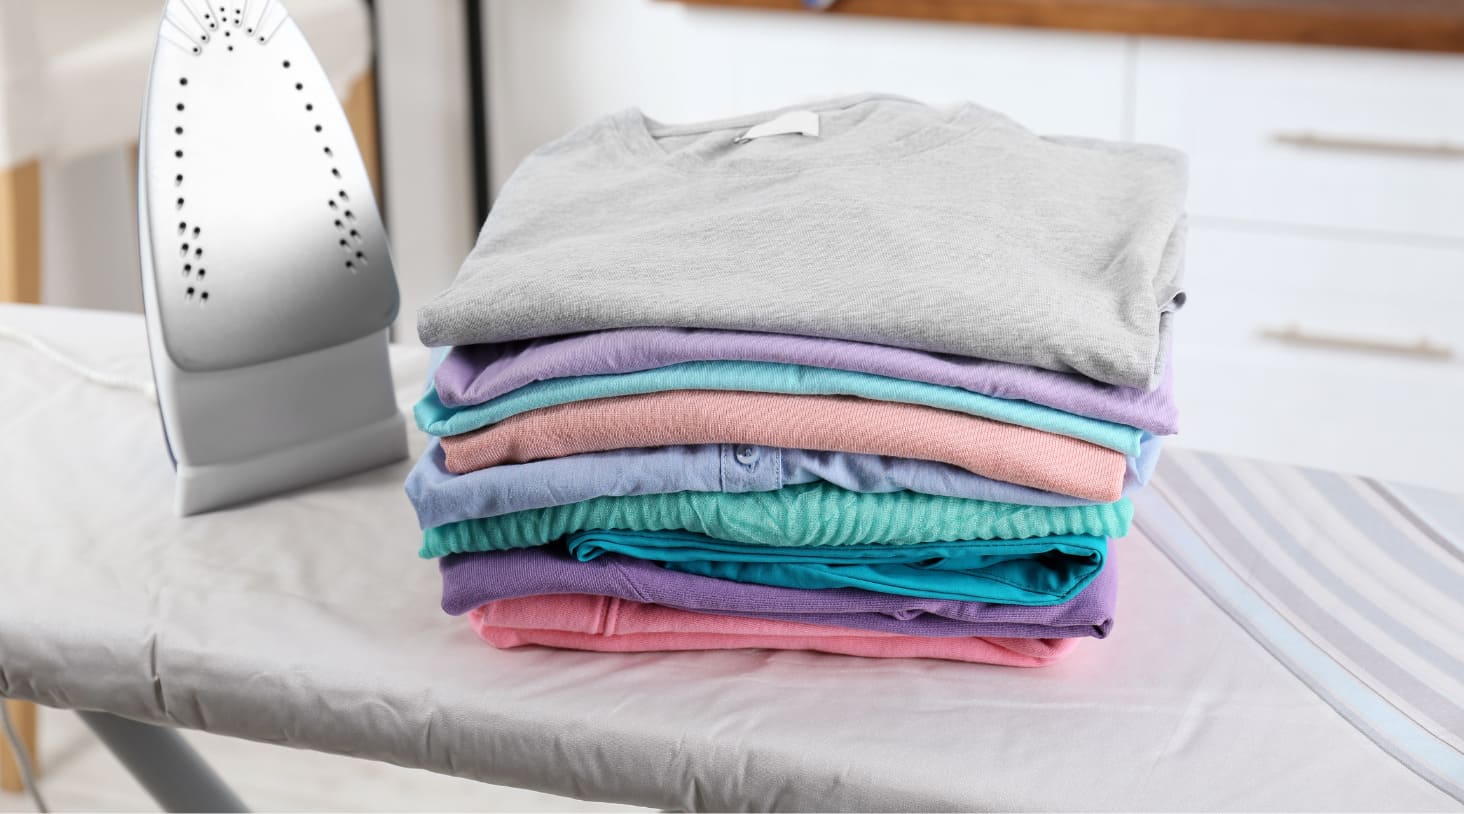 How to Fold, Iron, and Store Your Clothes Properly